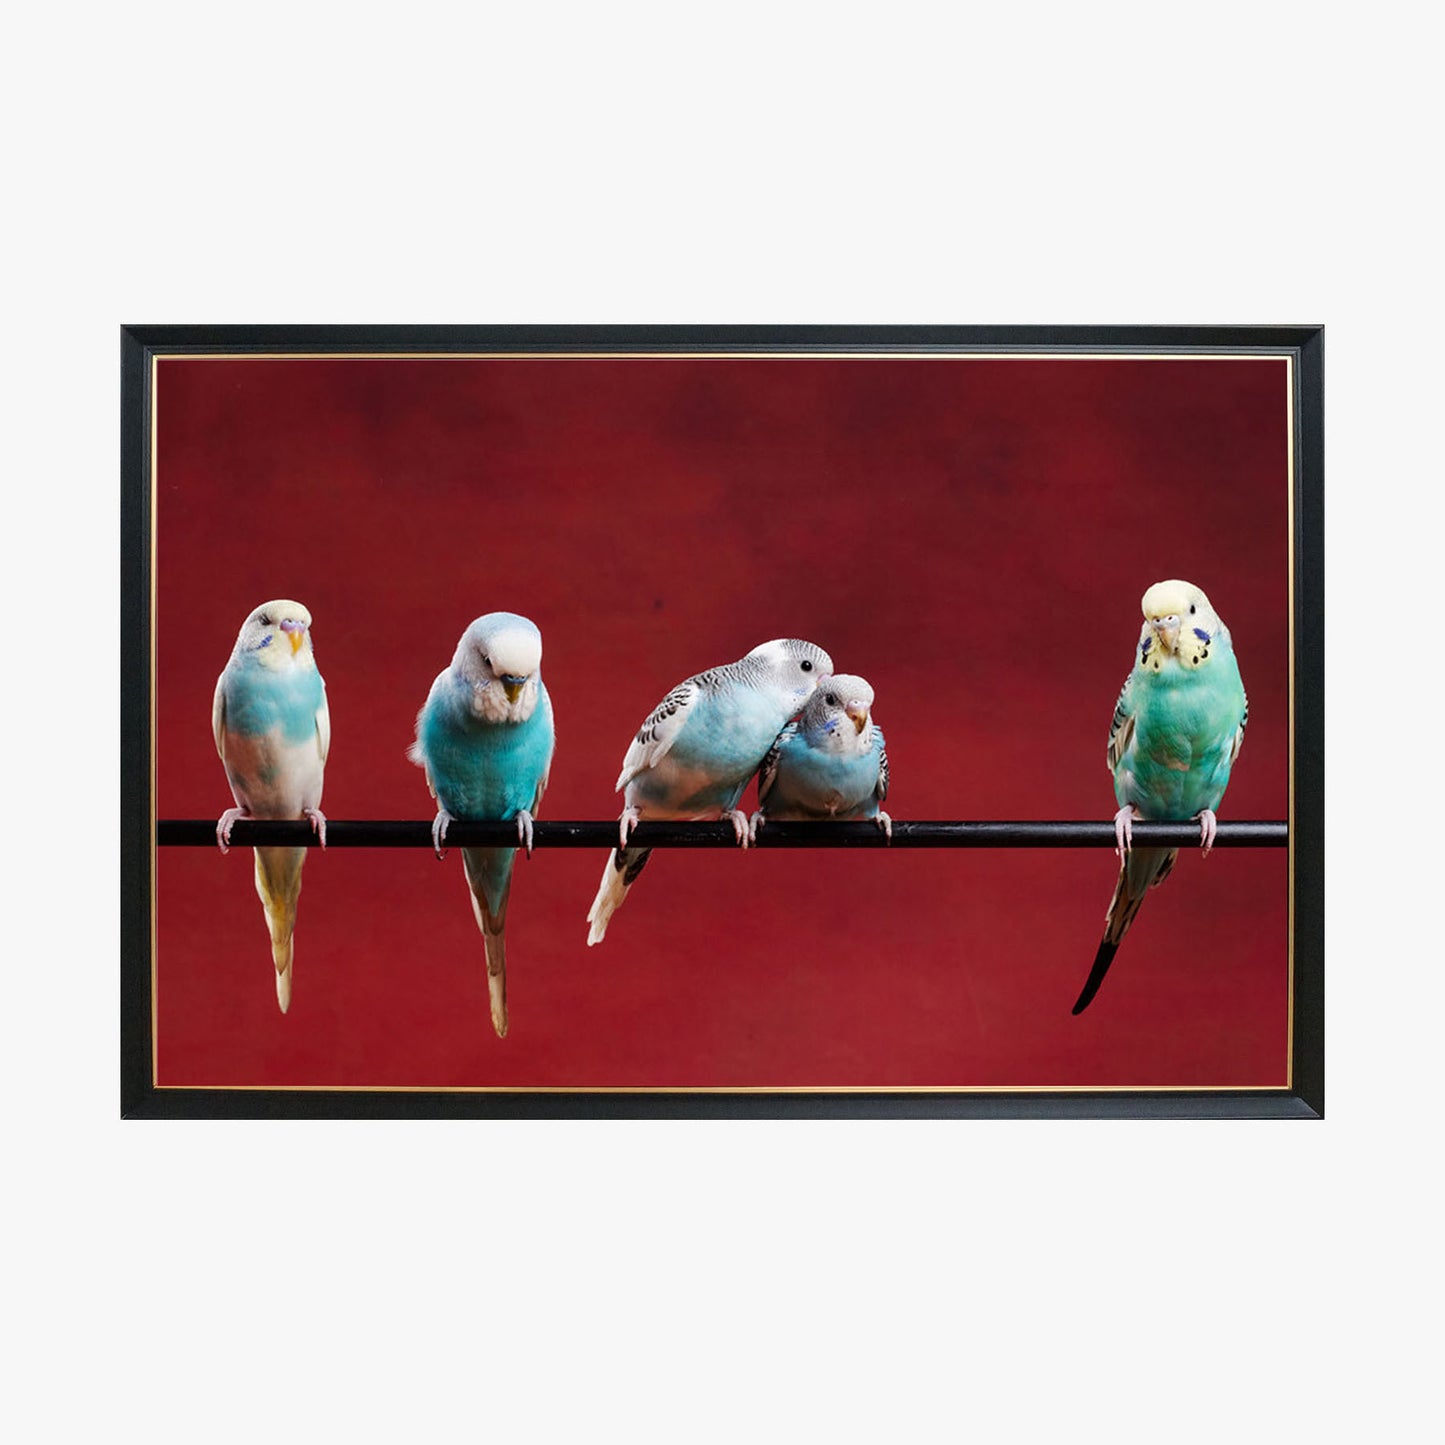 Crystal Painting - Five parrots